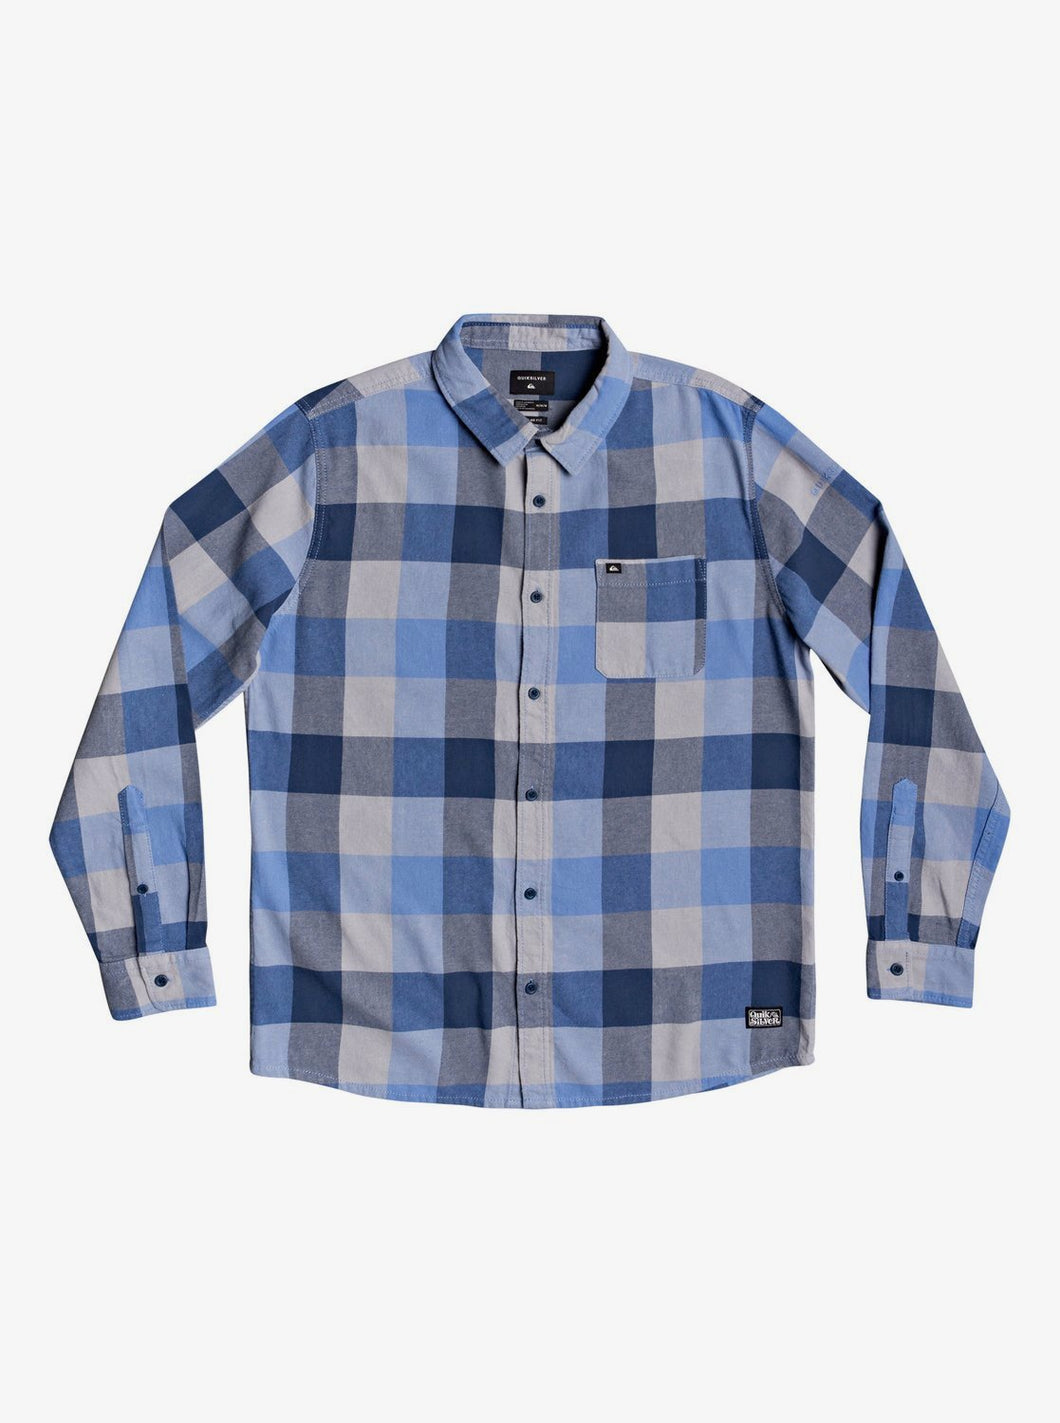 Quiksilver Motherfly Boy's Long Sleeve Flannel Shirt